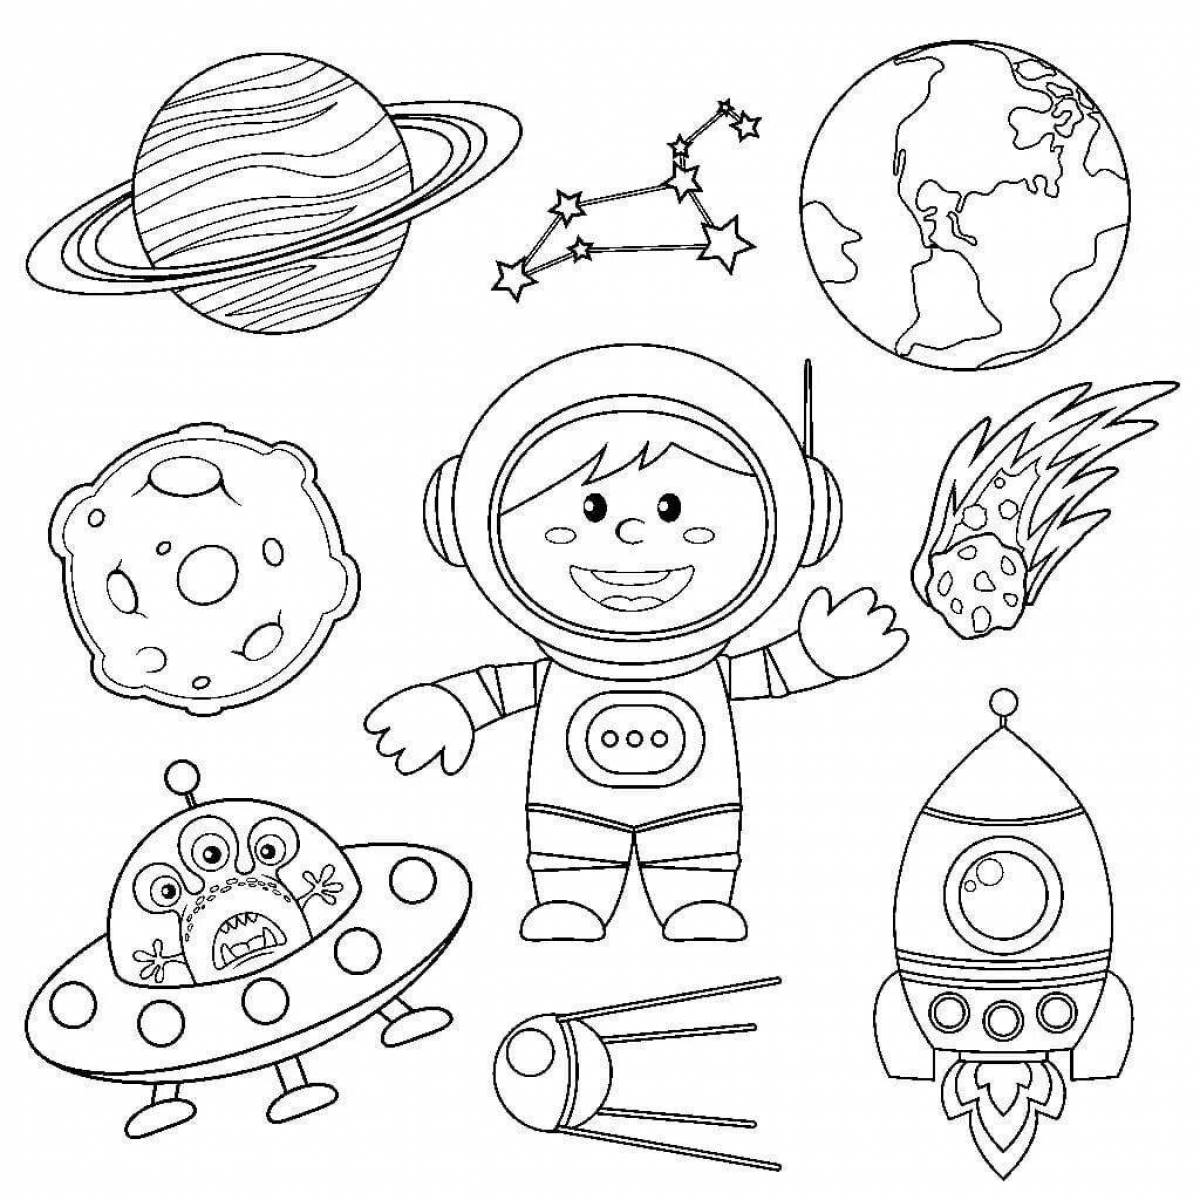 Coloring fantasy space and planets for kids